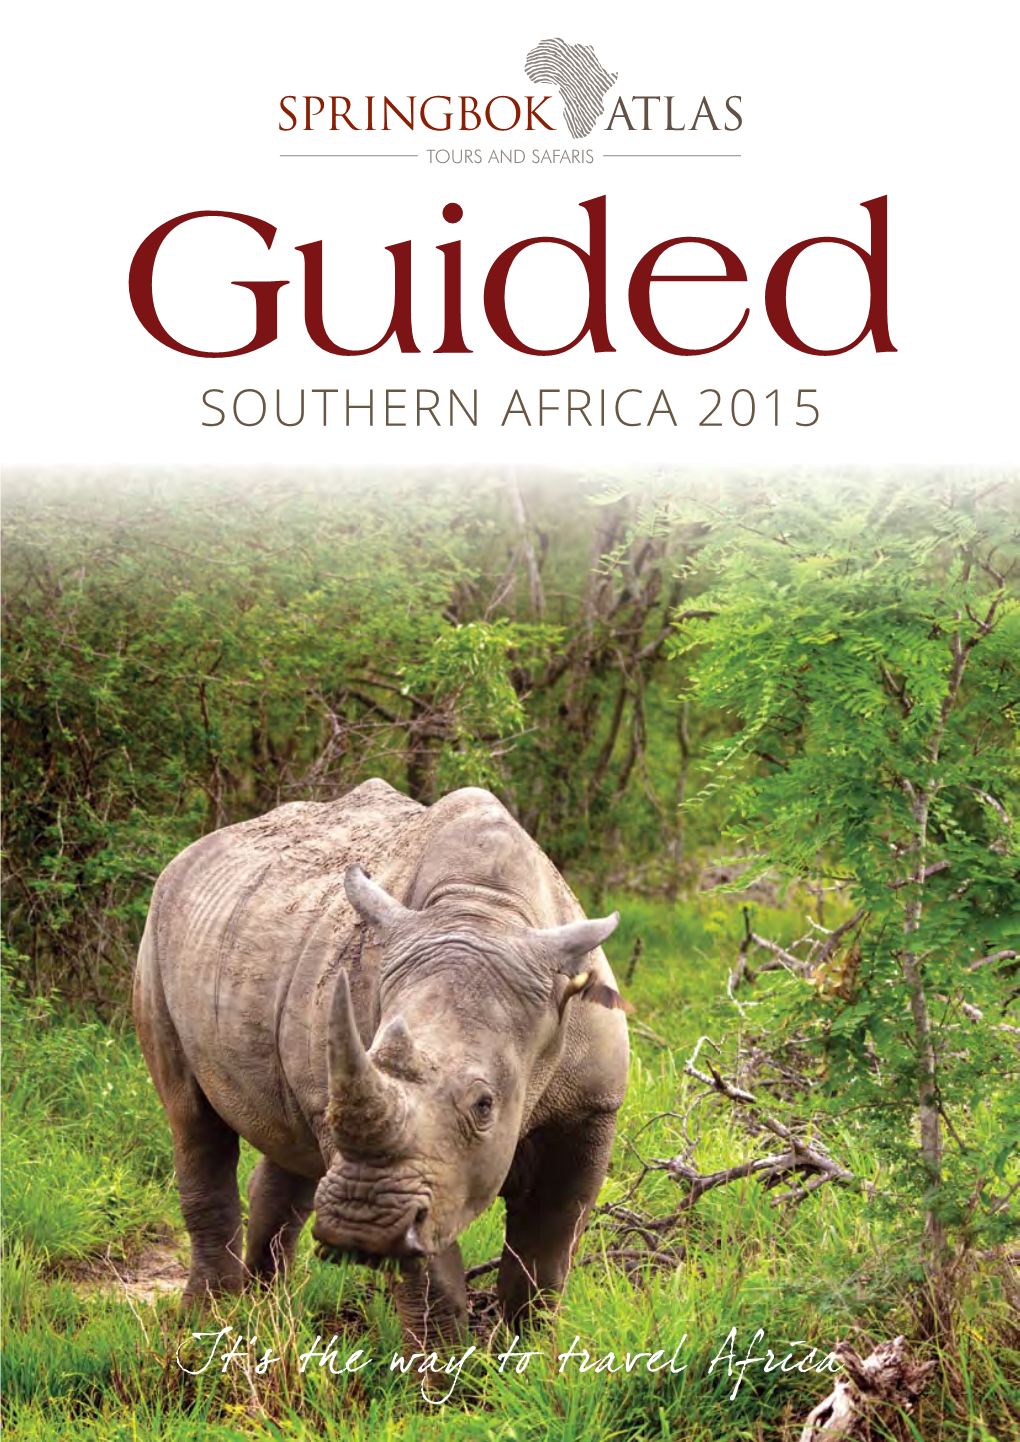 SOUTHERN AFRICA 2015 Stay Updated with OUR WIDE RANGE of GUIDED TOURS ON